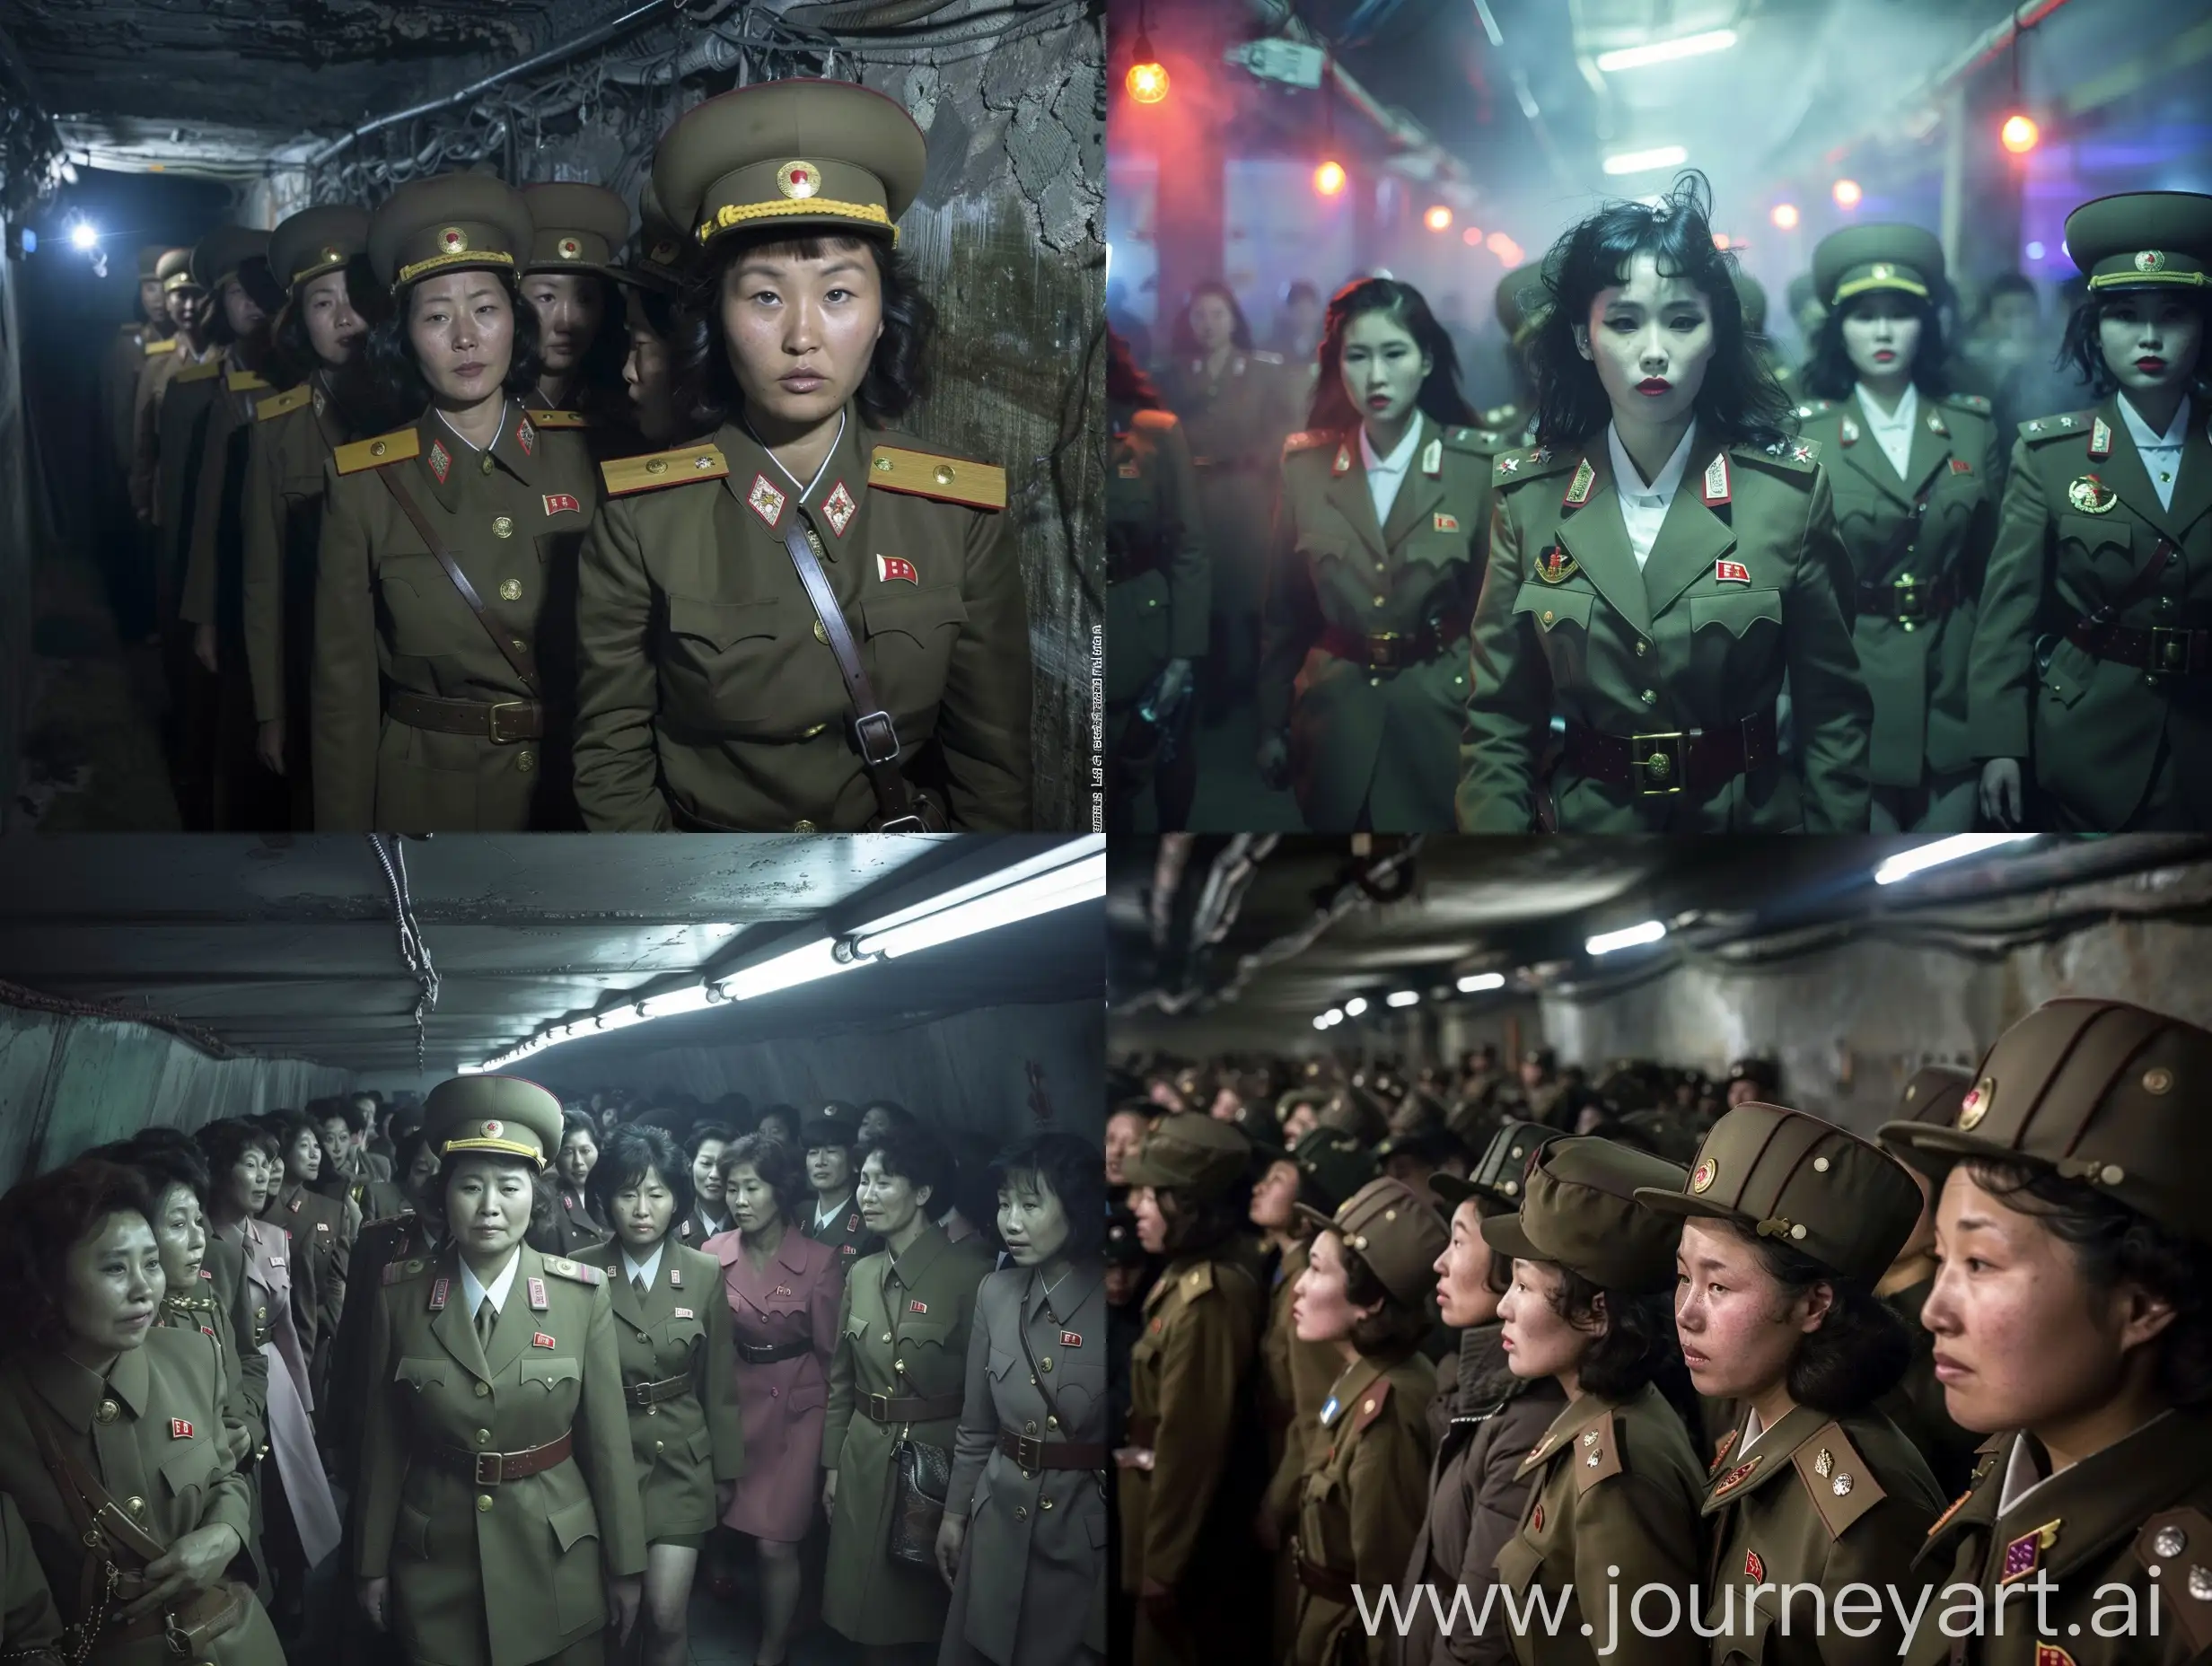 In North Korea, the military raided an illegal underground nightclub with group of women’s.